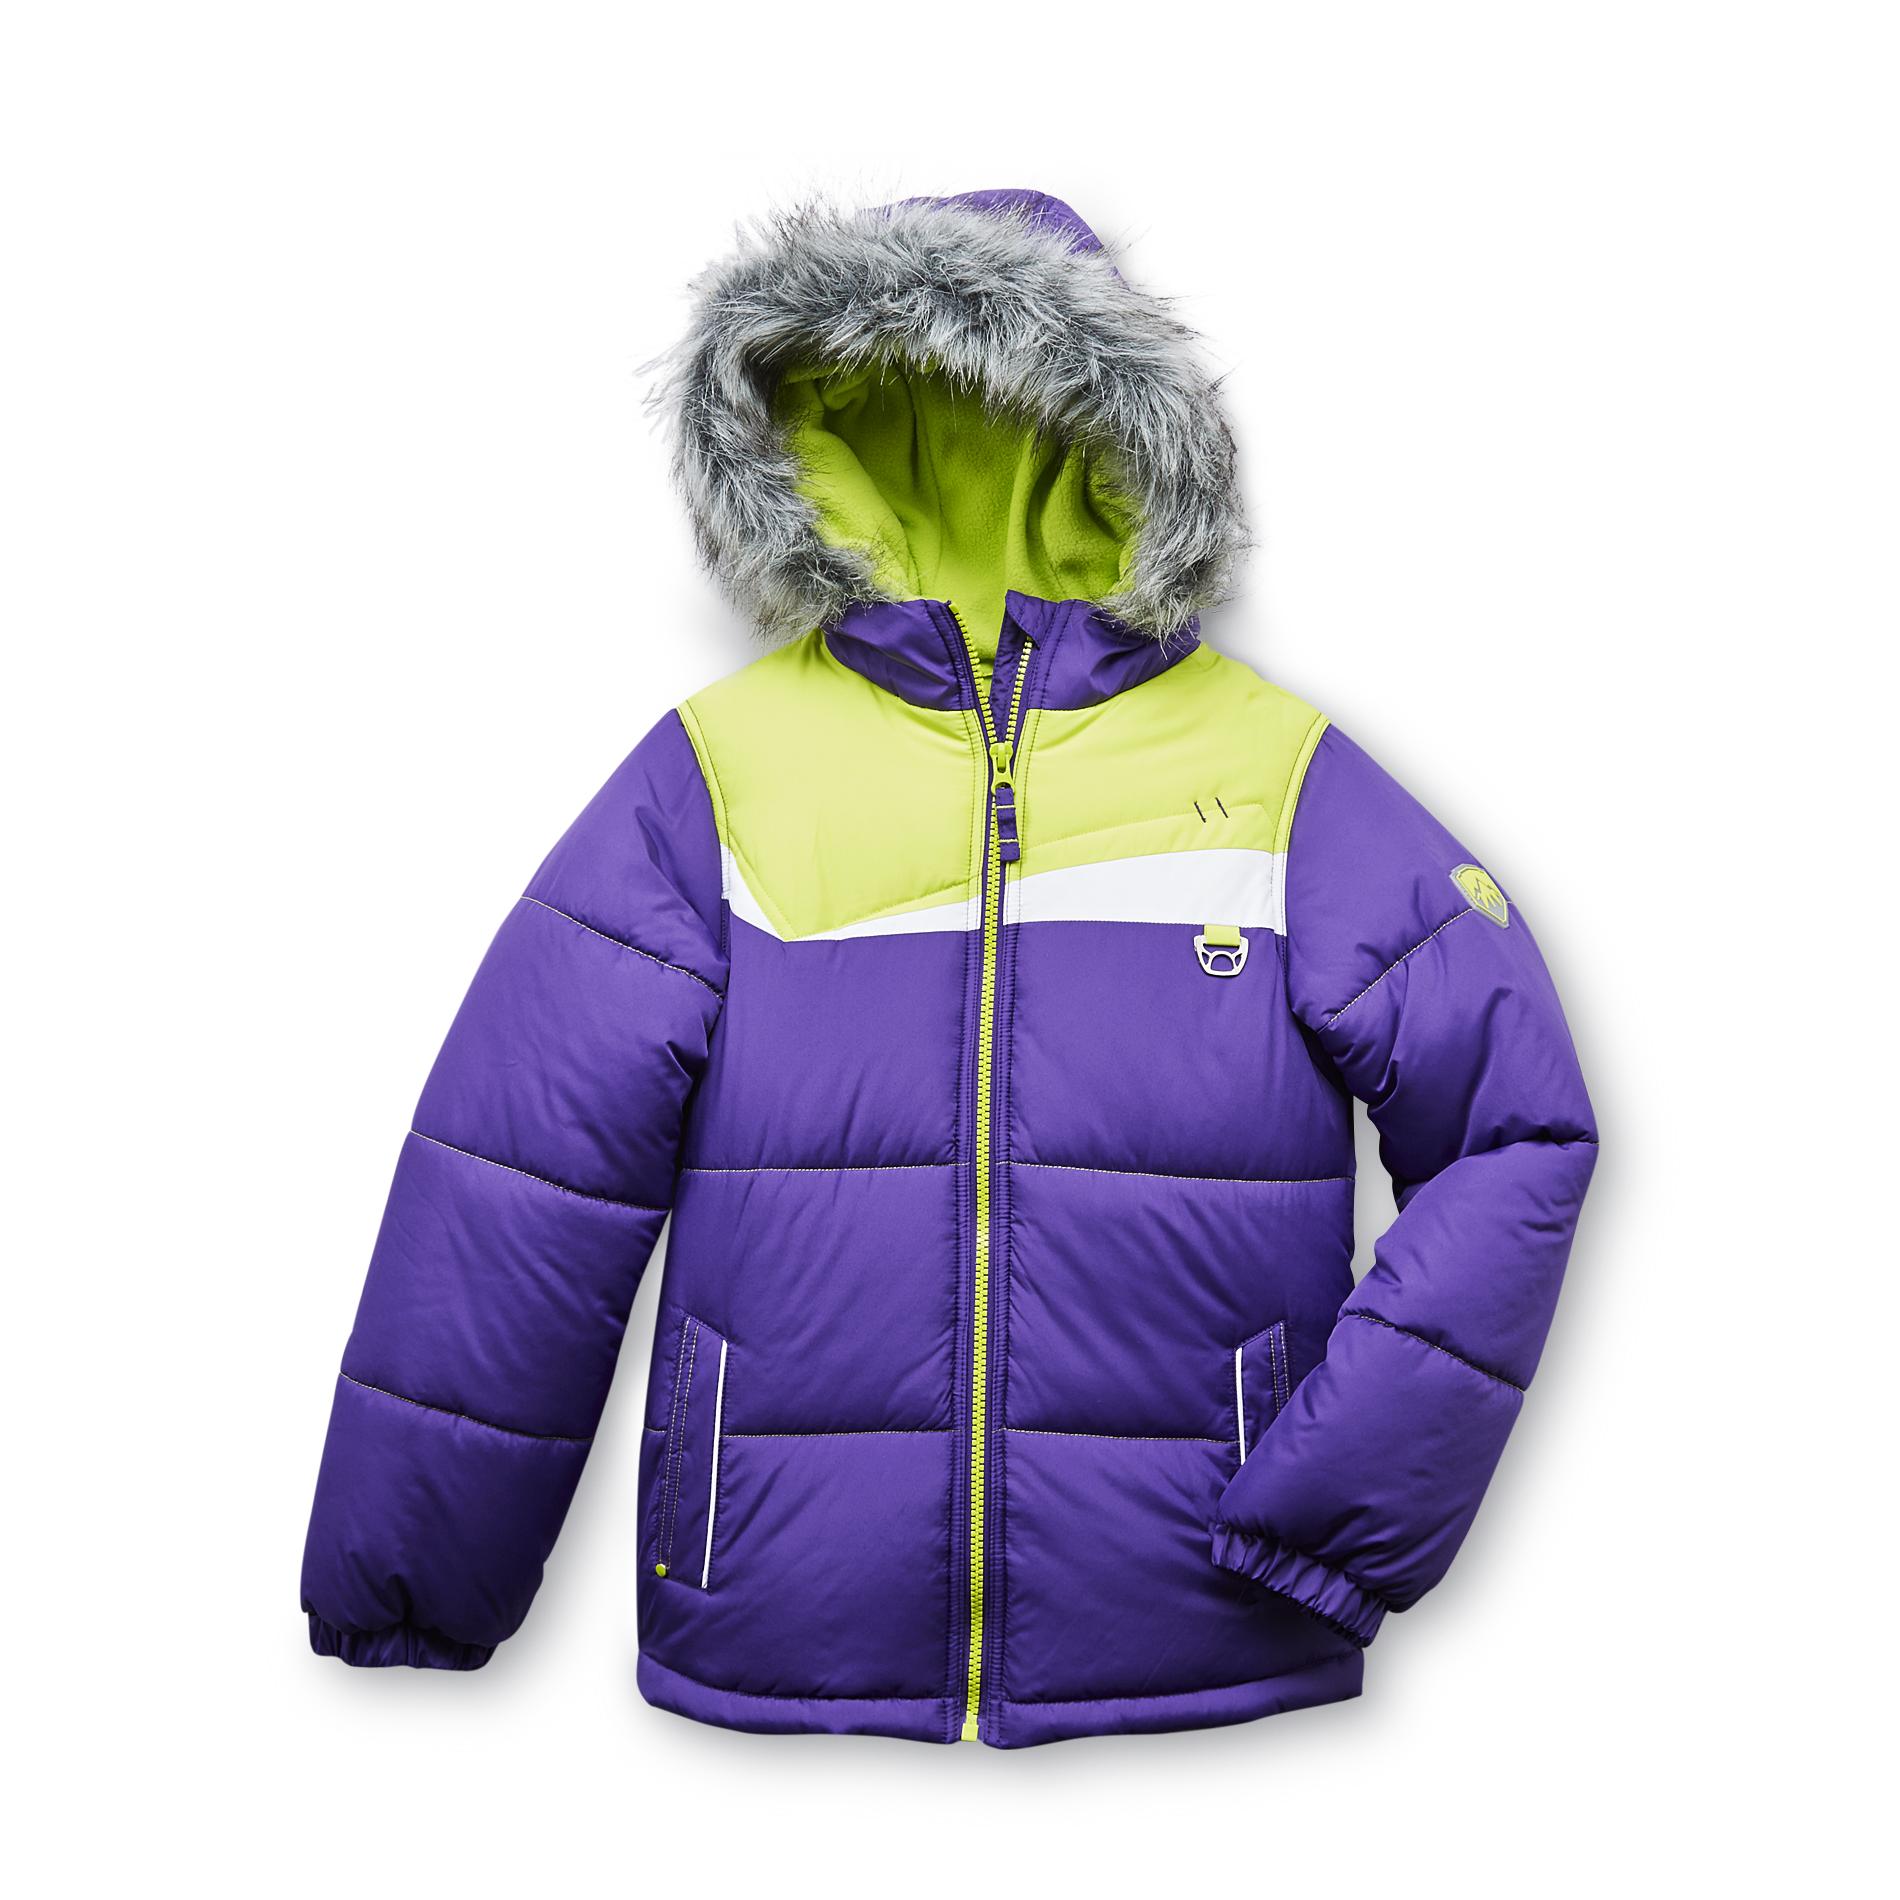 Canyon River Blues Girl's Hooded Winter Jacket